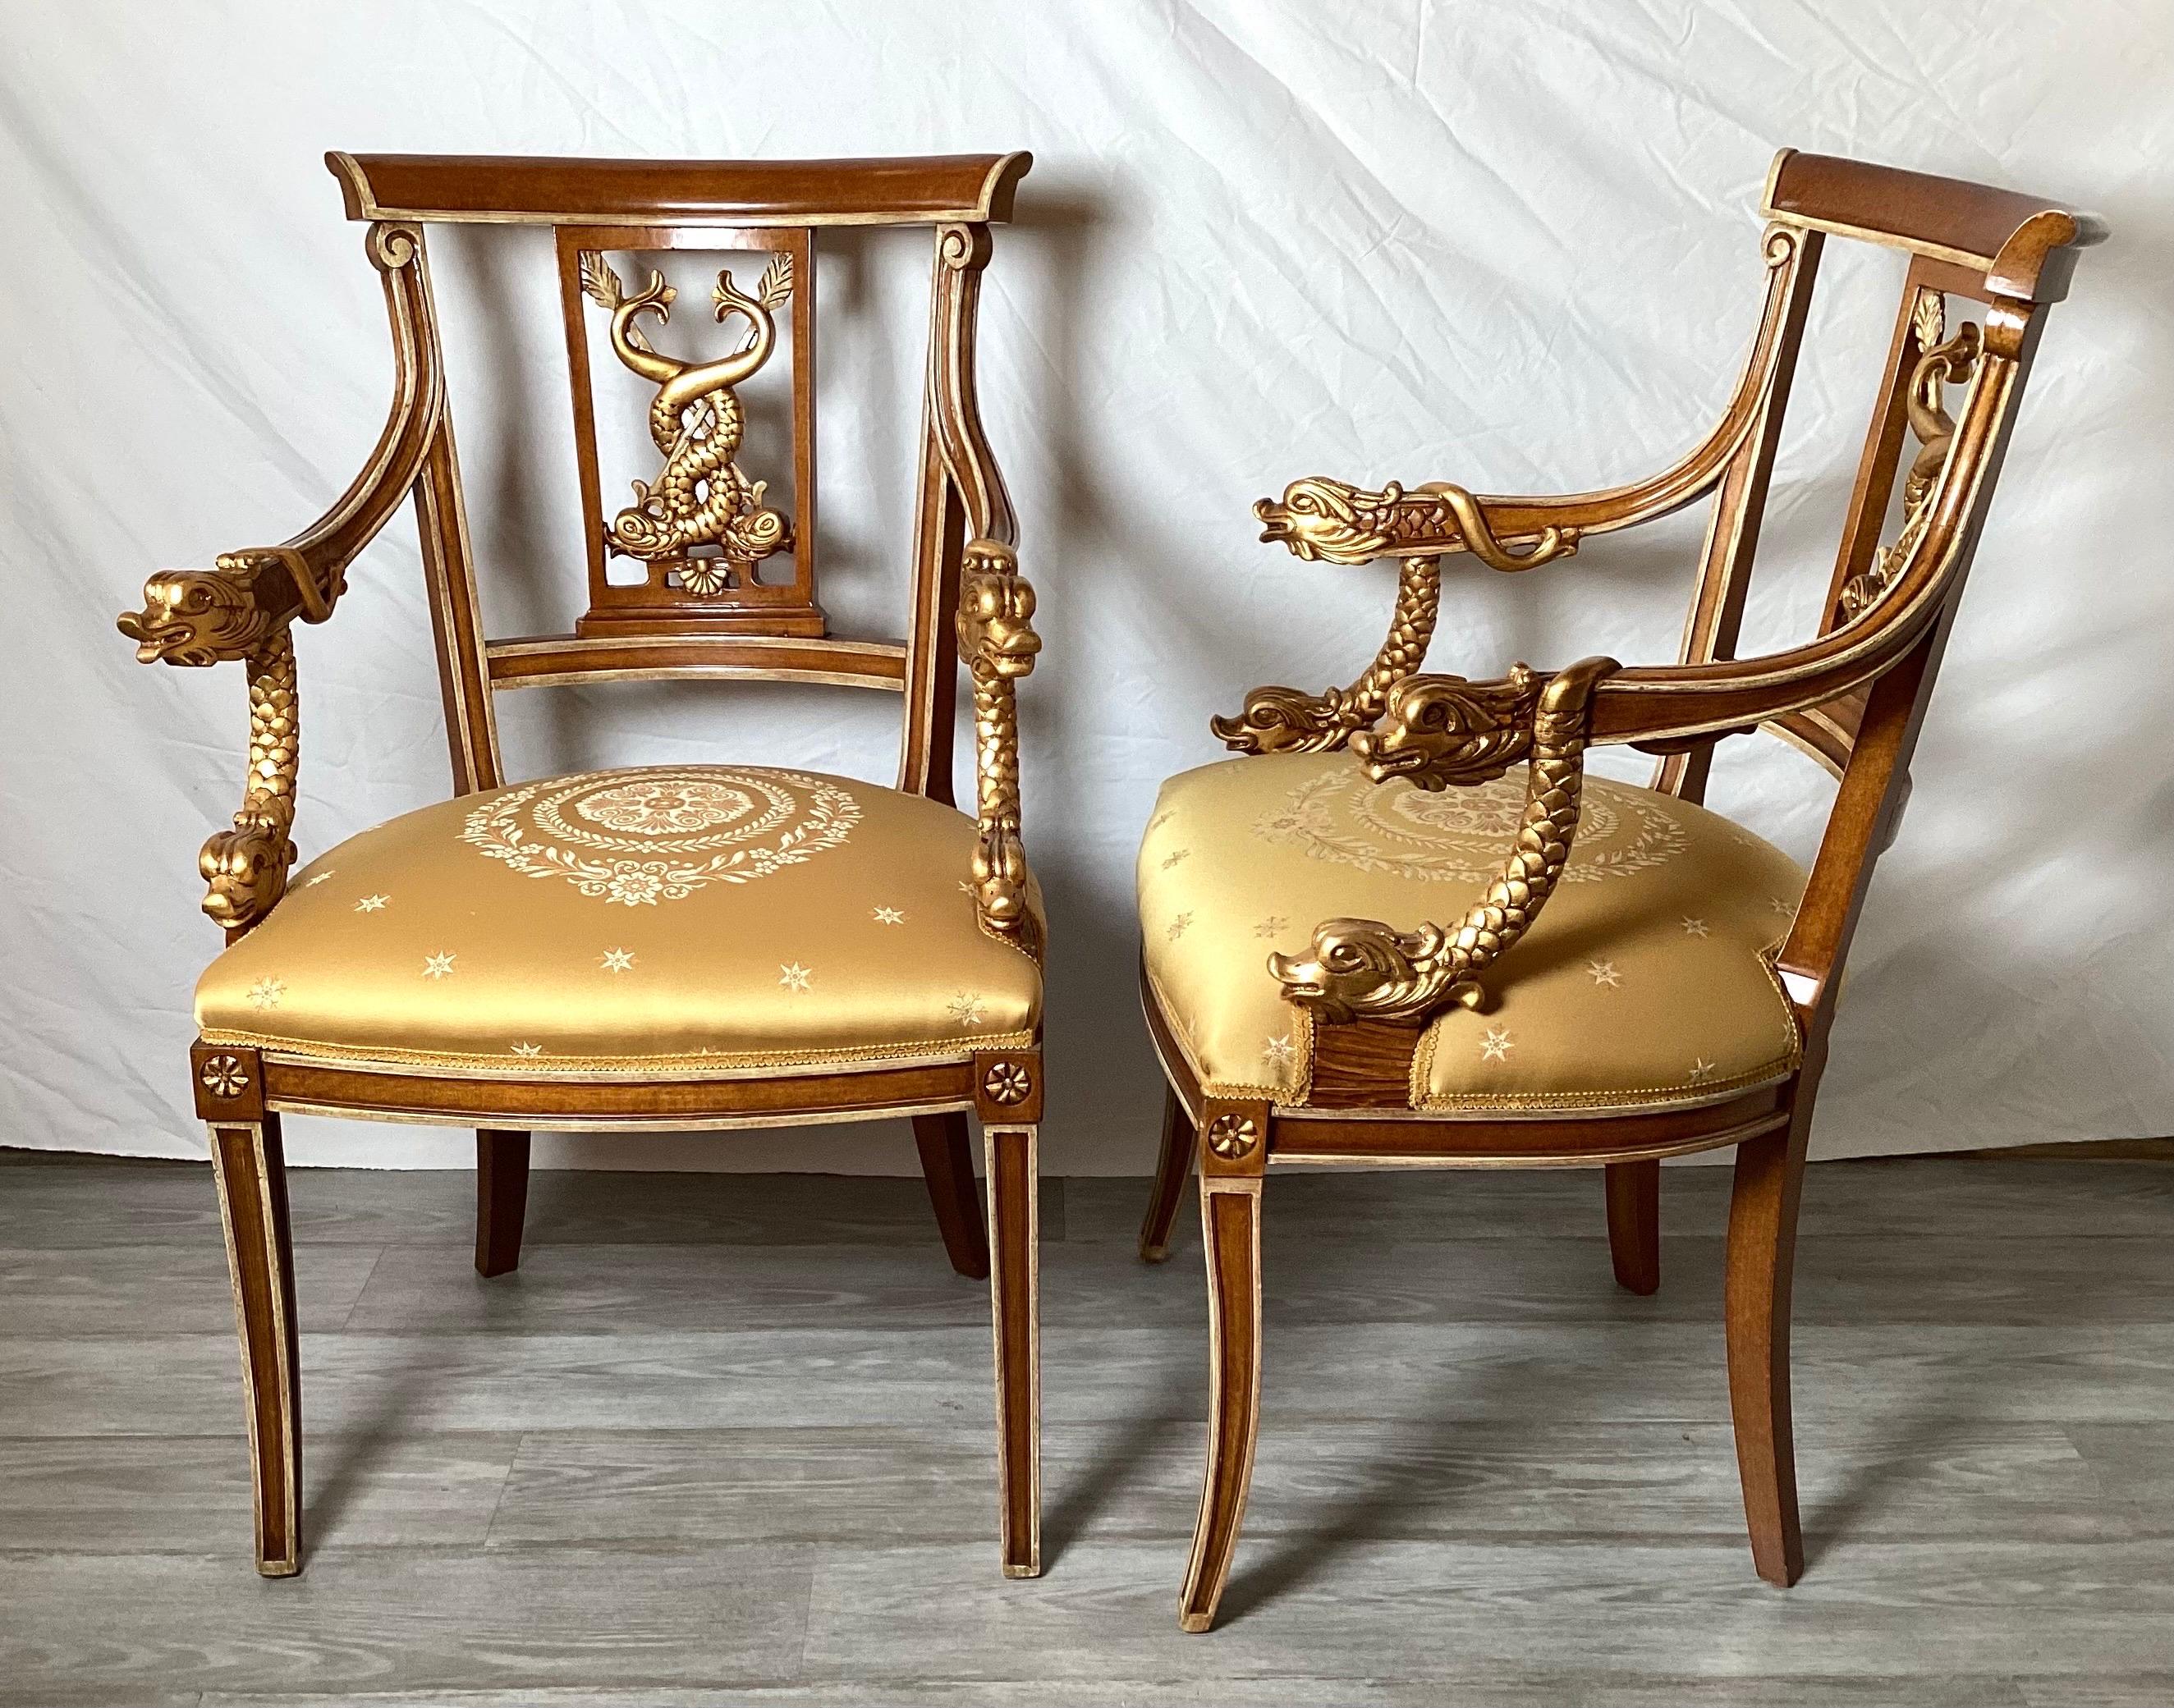 An elegant pair of hand craved neoclassical armchairs with gilt decoration. Made in Italy by Galimberti Lino. The back and arms with a dolphin motif with gilt trim all around the frames. The seats with a gold damask medallion.